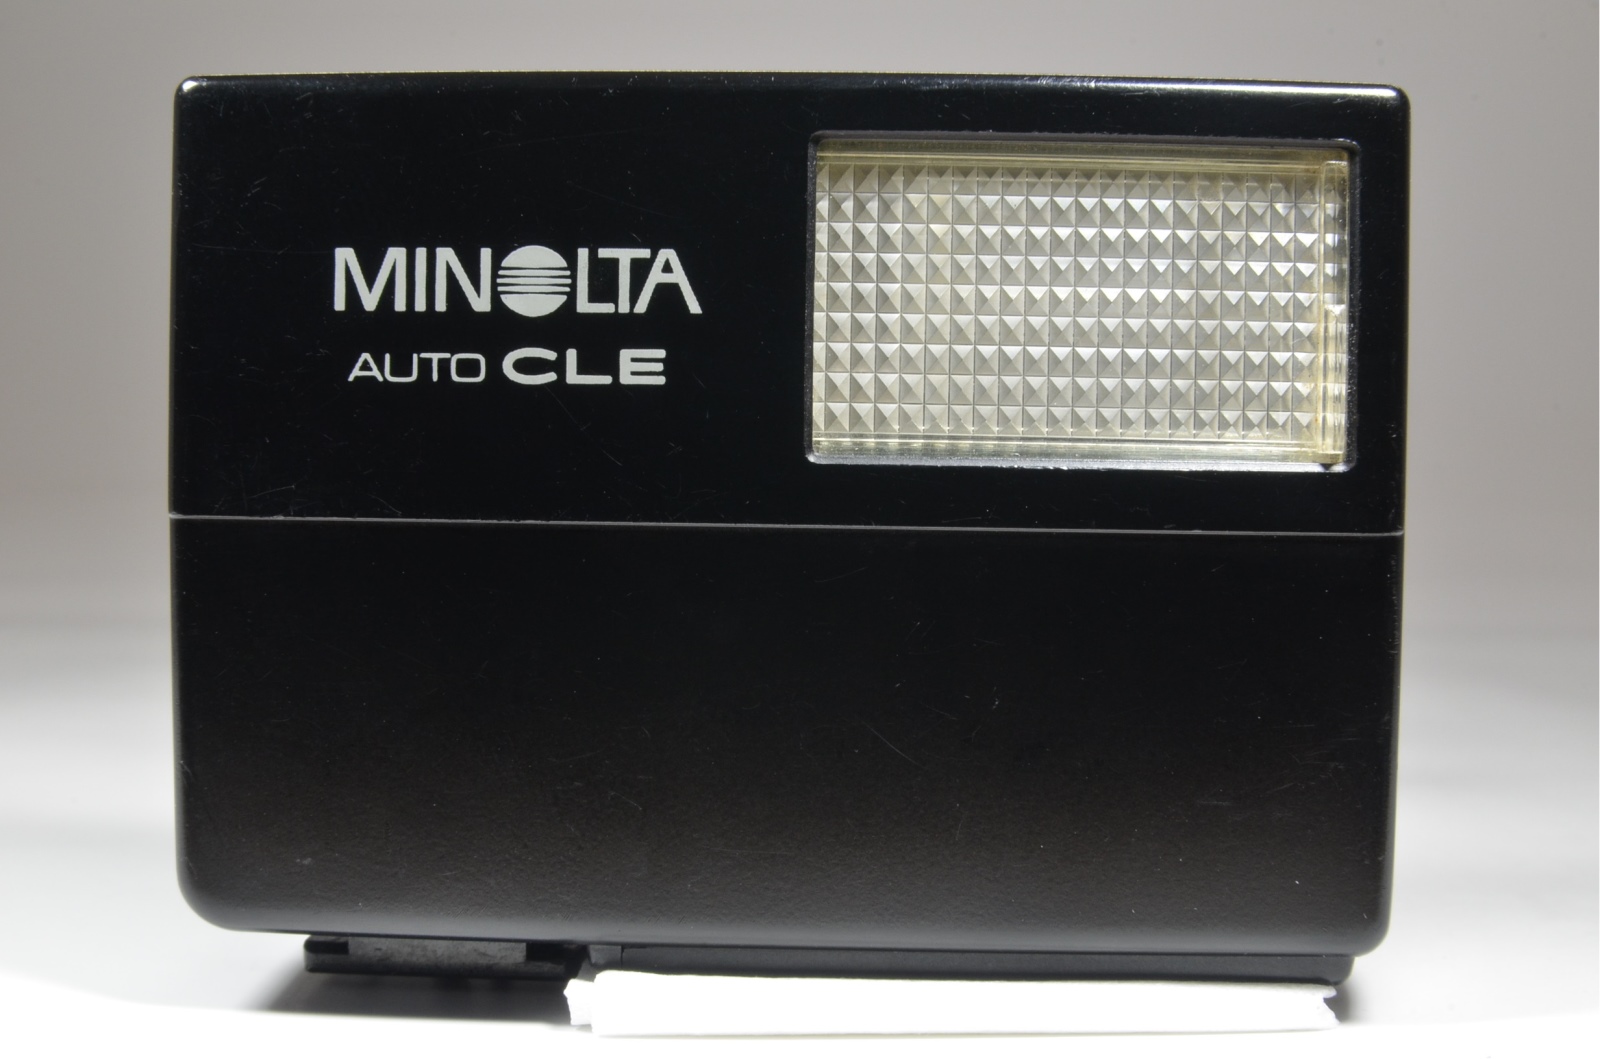 minolta cle with m-rokkor 40mm f2, strap, flash, cable oc